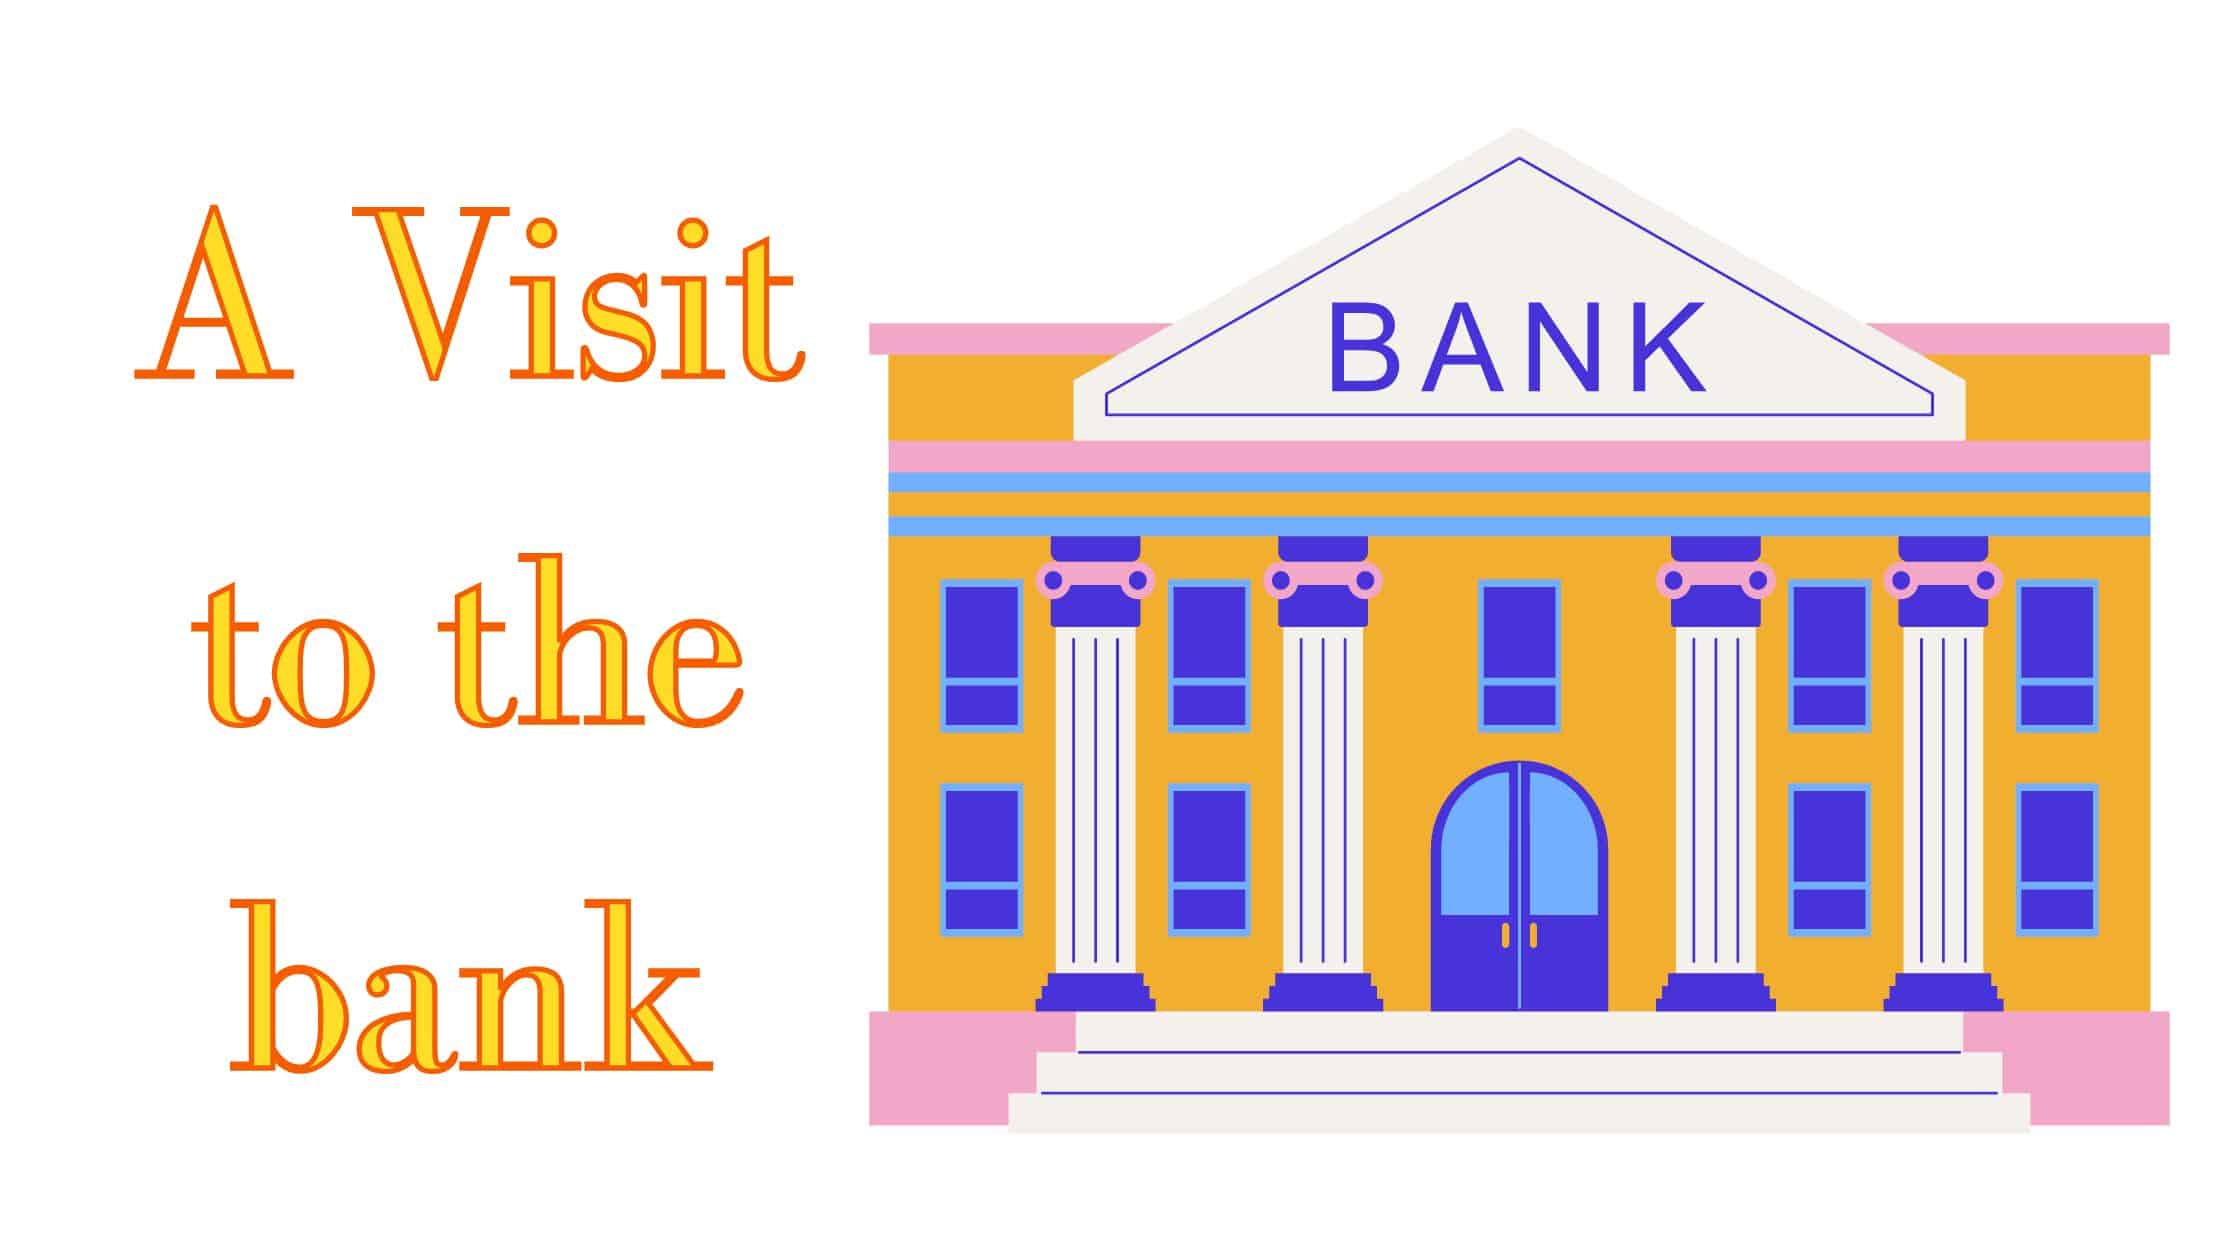 A visit to the bank